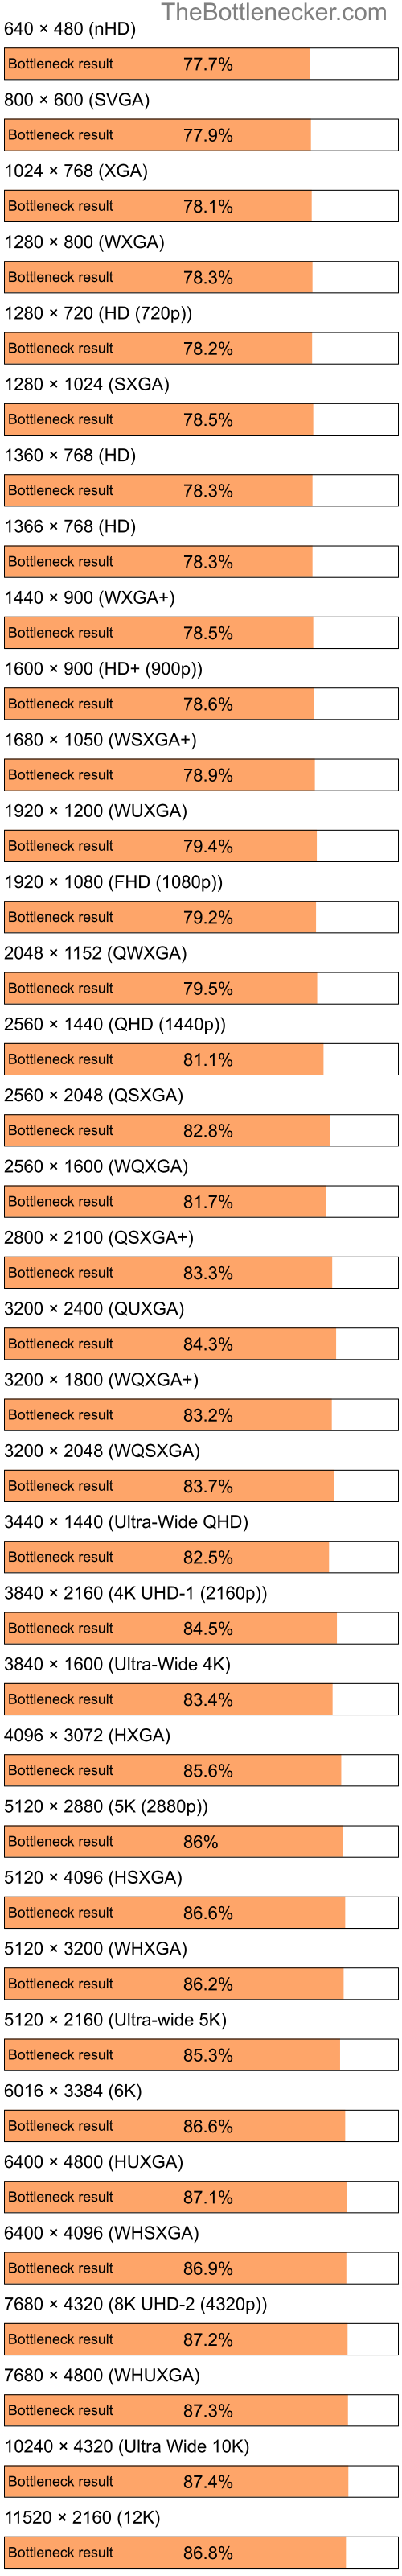 Bottleneck results by resolution for Intel Atom Z520 and AMD Mobility Radeon X600 in Graphic Card Intense Tasks